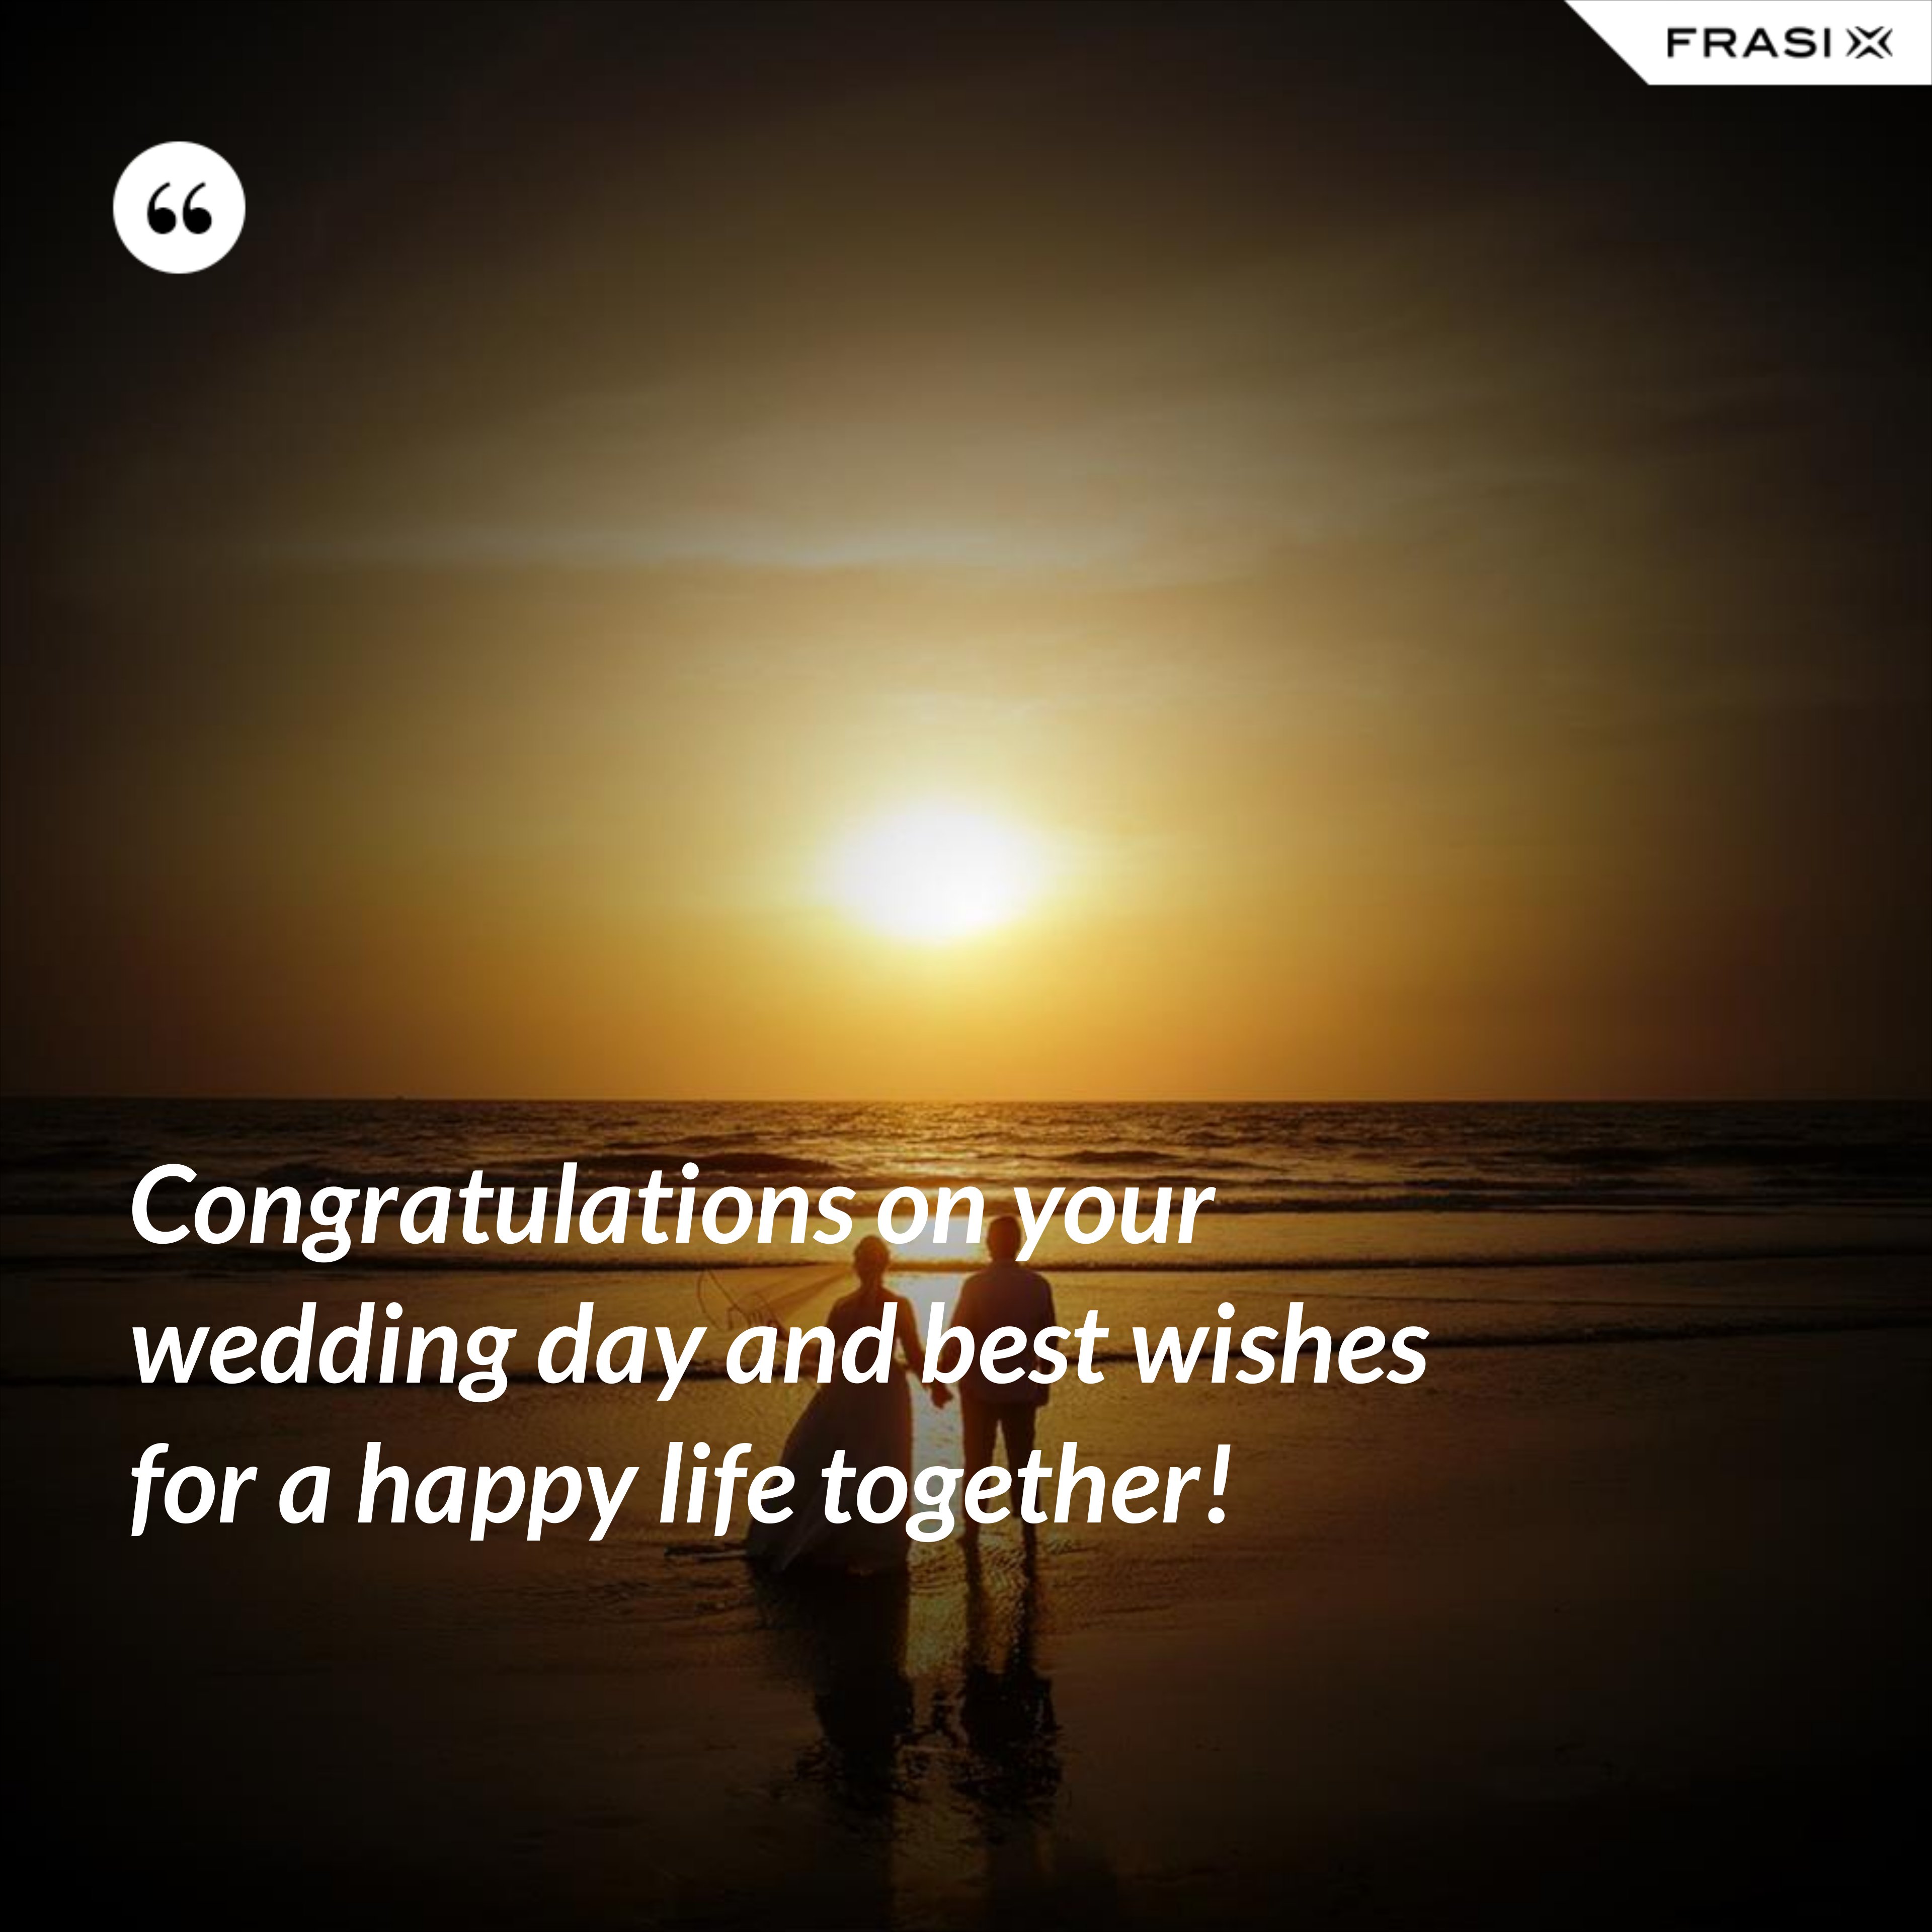 Congratulations on your wedding day and best wishes for a happy life together! - Anonimo